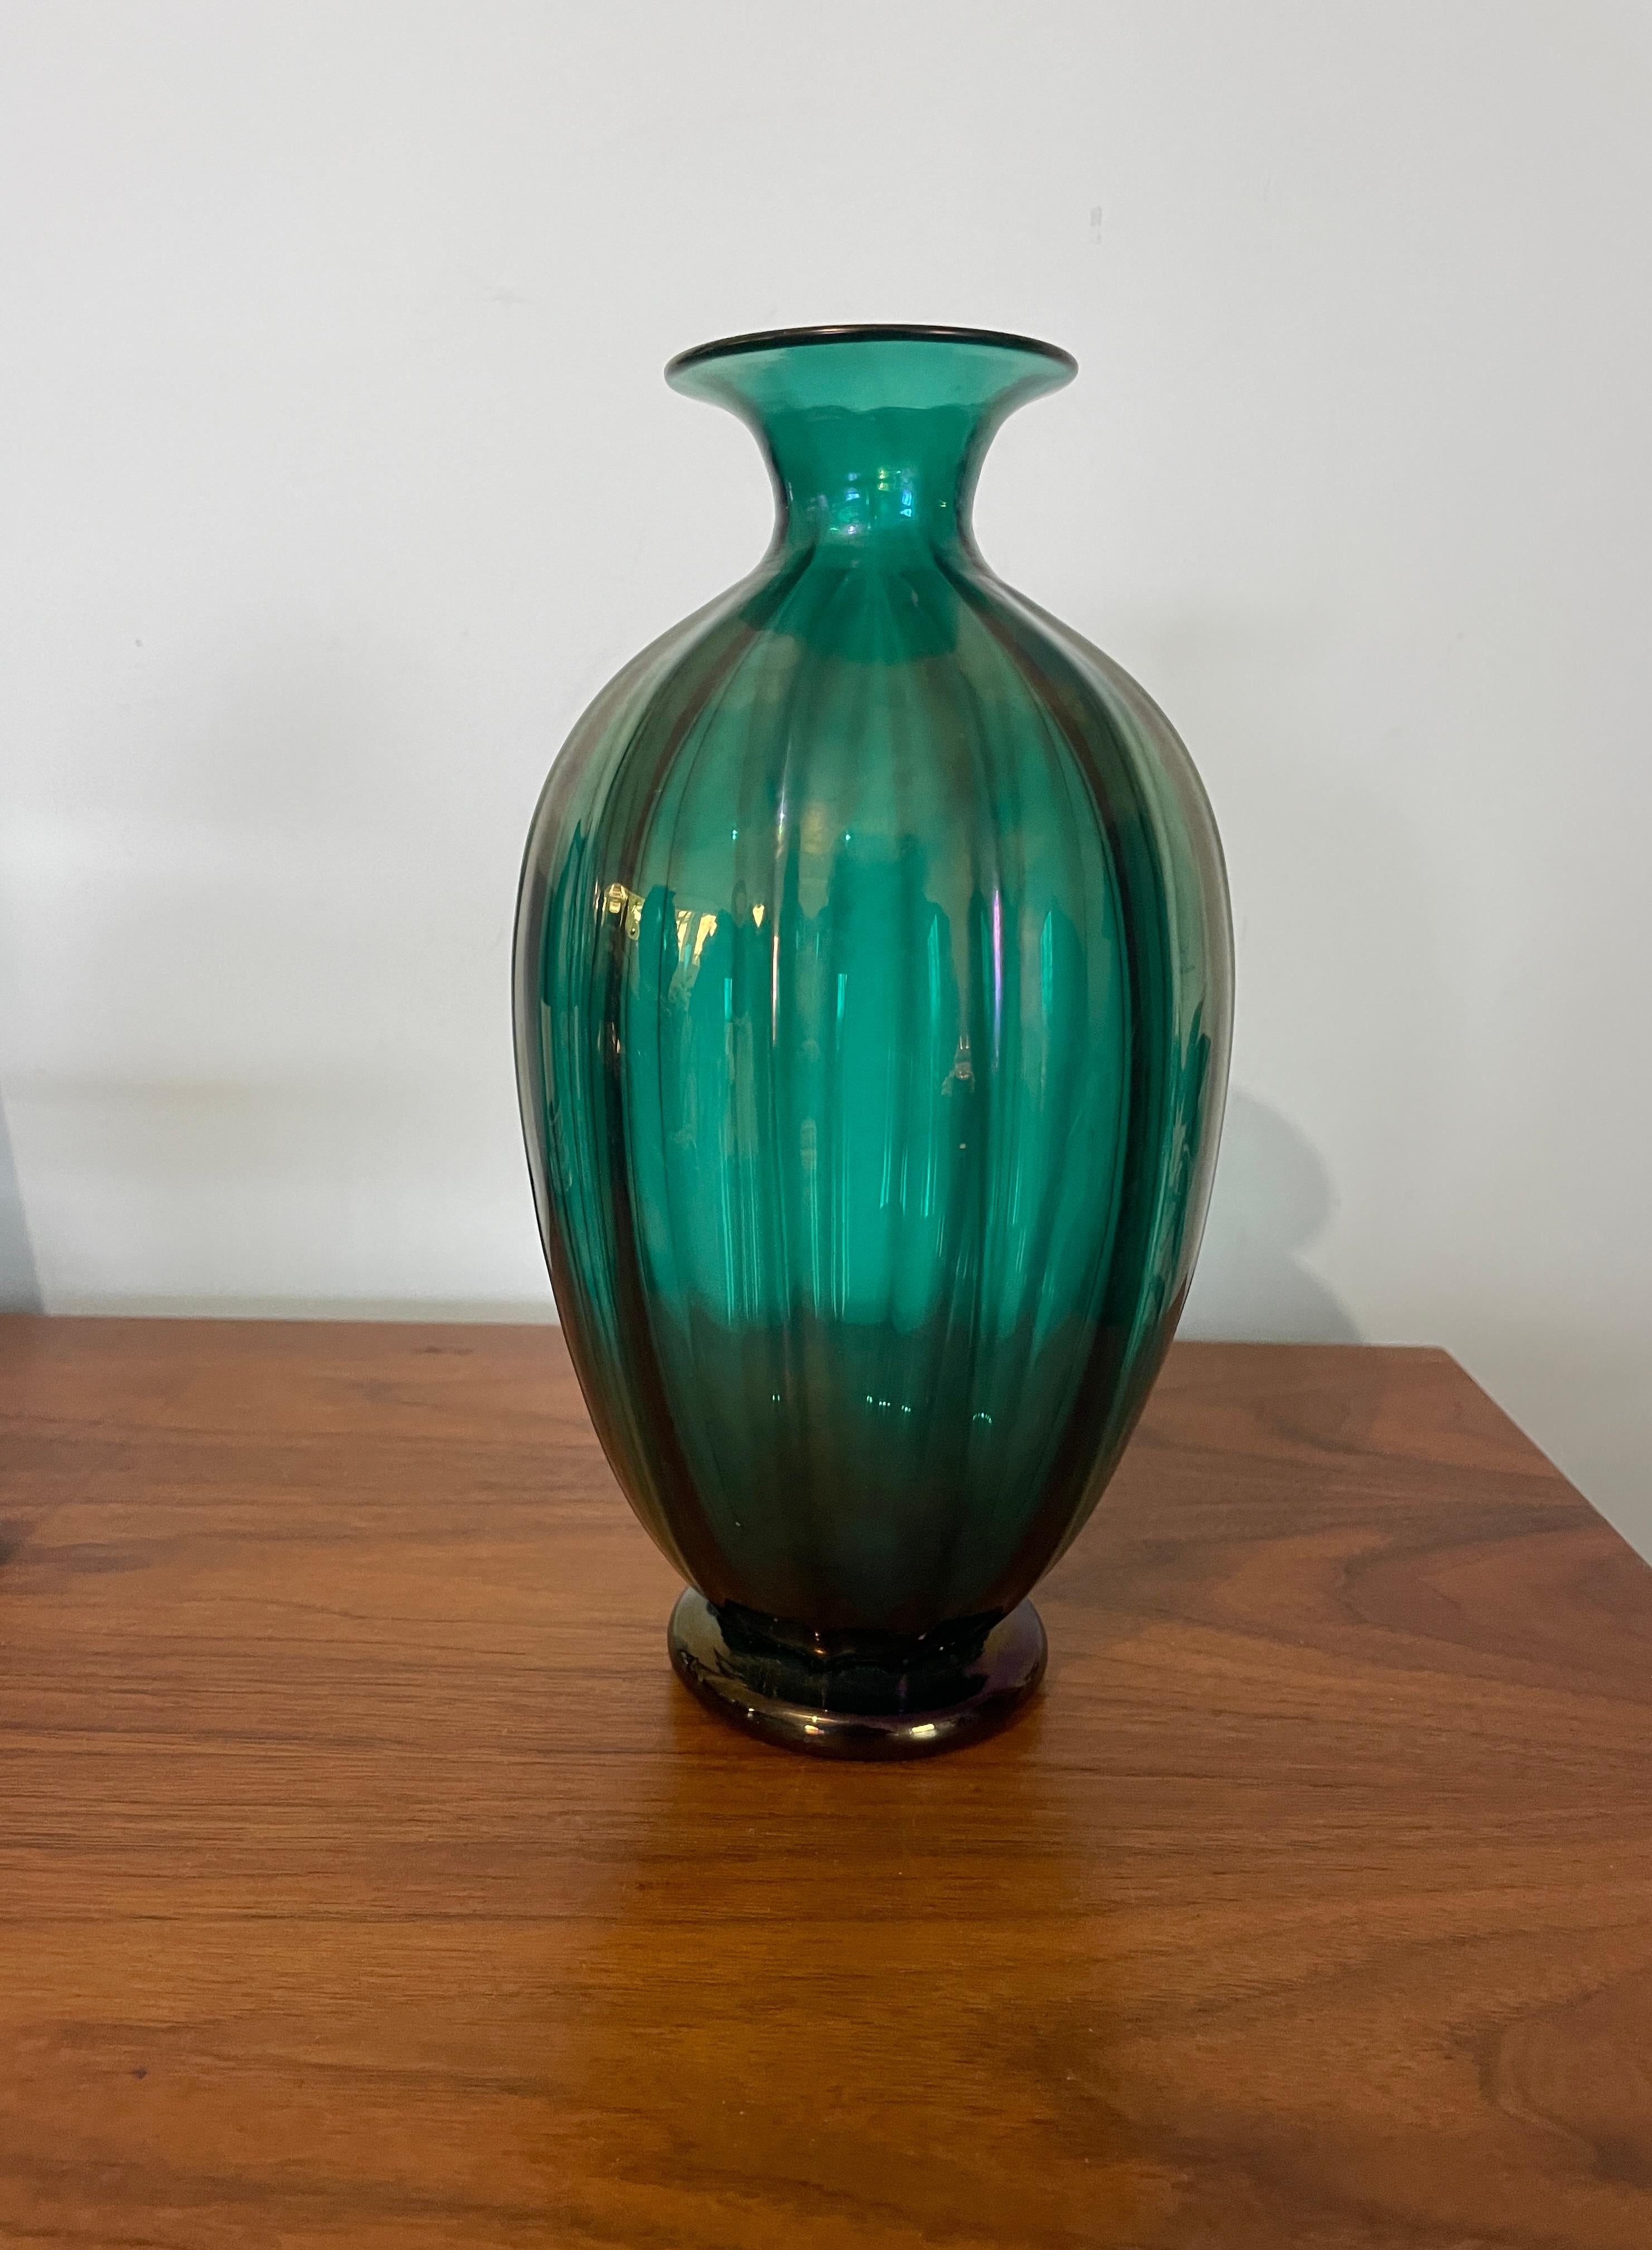 This beautiful vase by Archimede Seguso features ribbed iridescence in a stunning shade of green, making it a perfect addition to any collection of decorative items. The vase has been crafted with great care and attention to detail, showcasing the